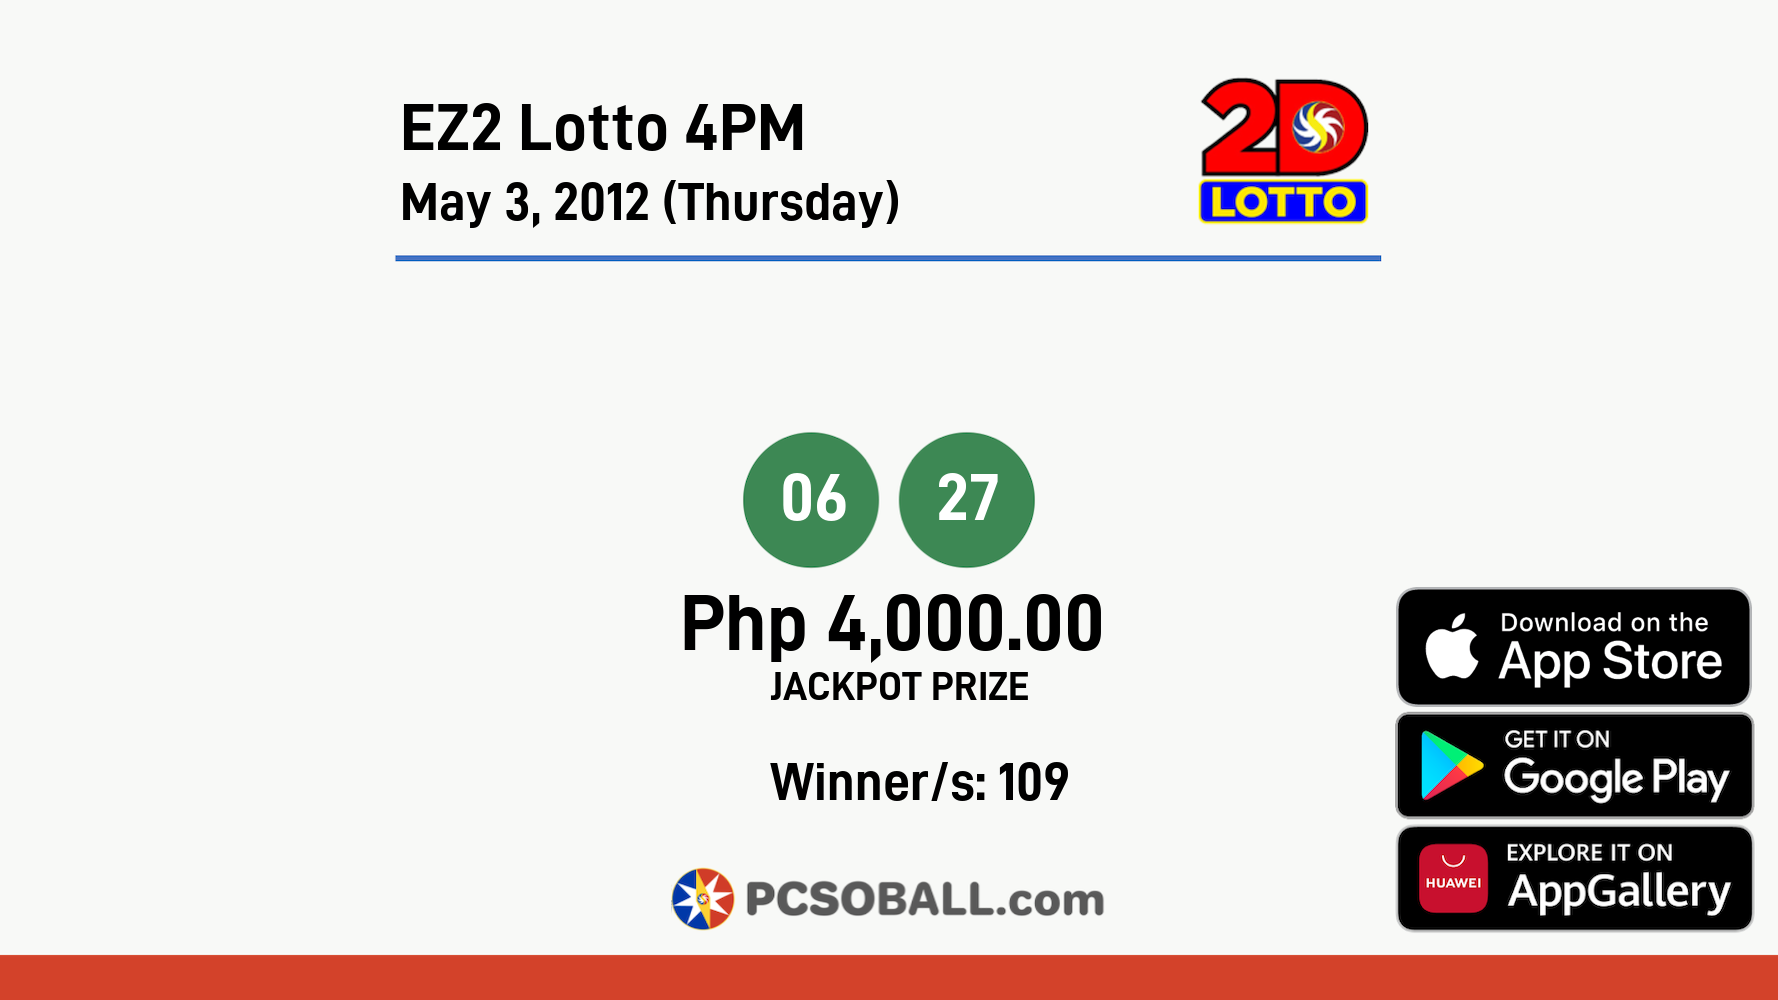 EZ2 Lotto 4PM May 3, 2012 (Thursday) Result